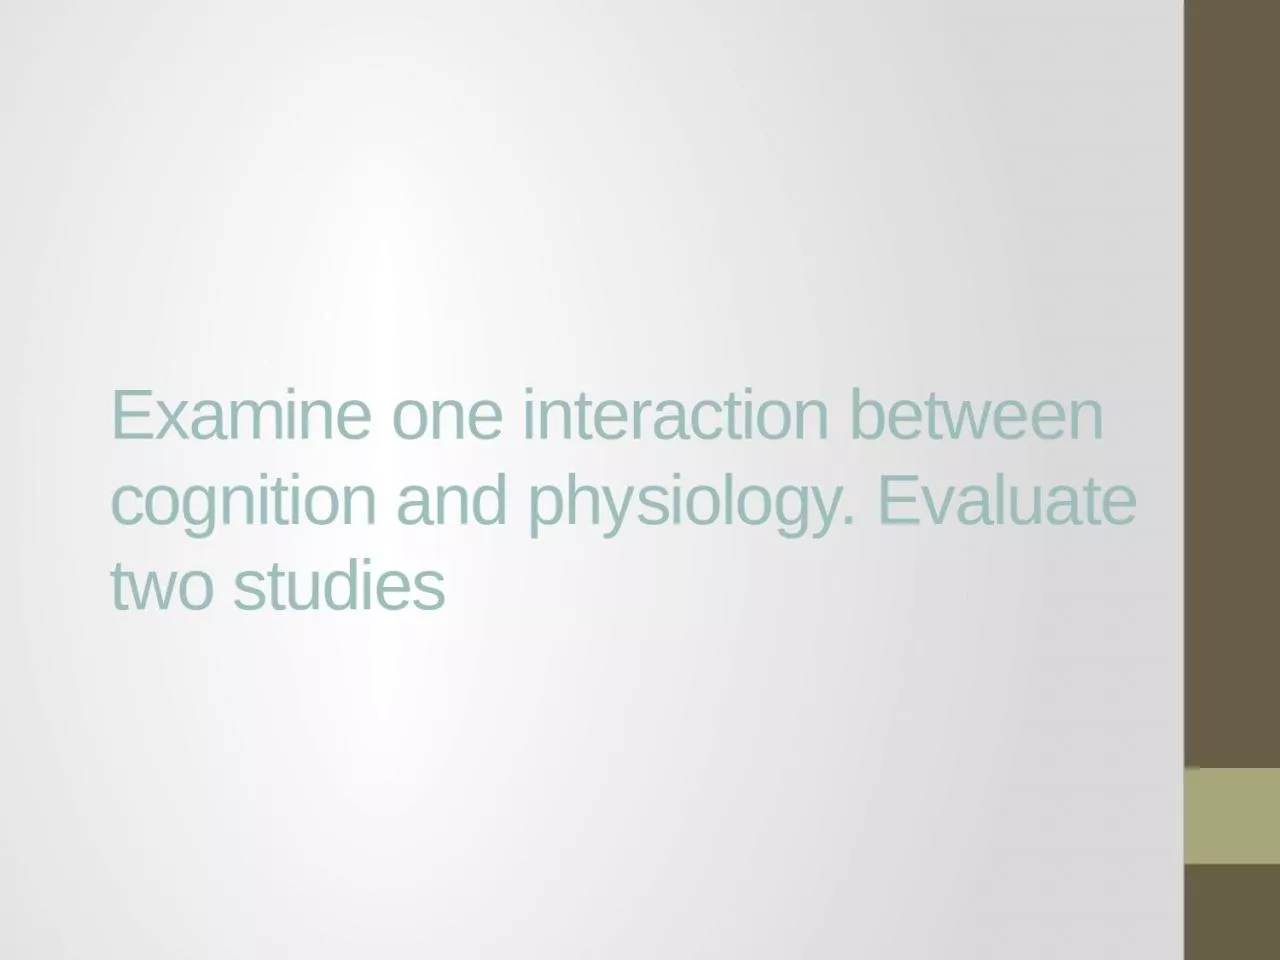 Examine one interaction between cognition and physiology. Evaluate two studies